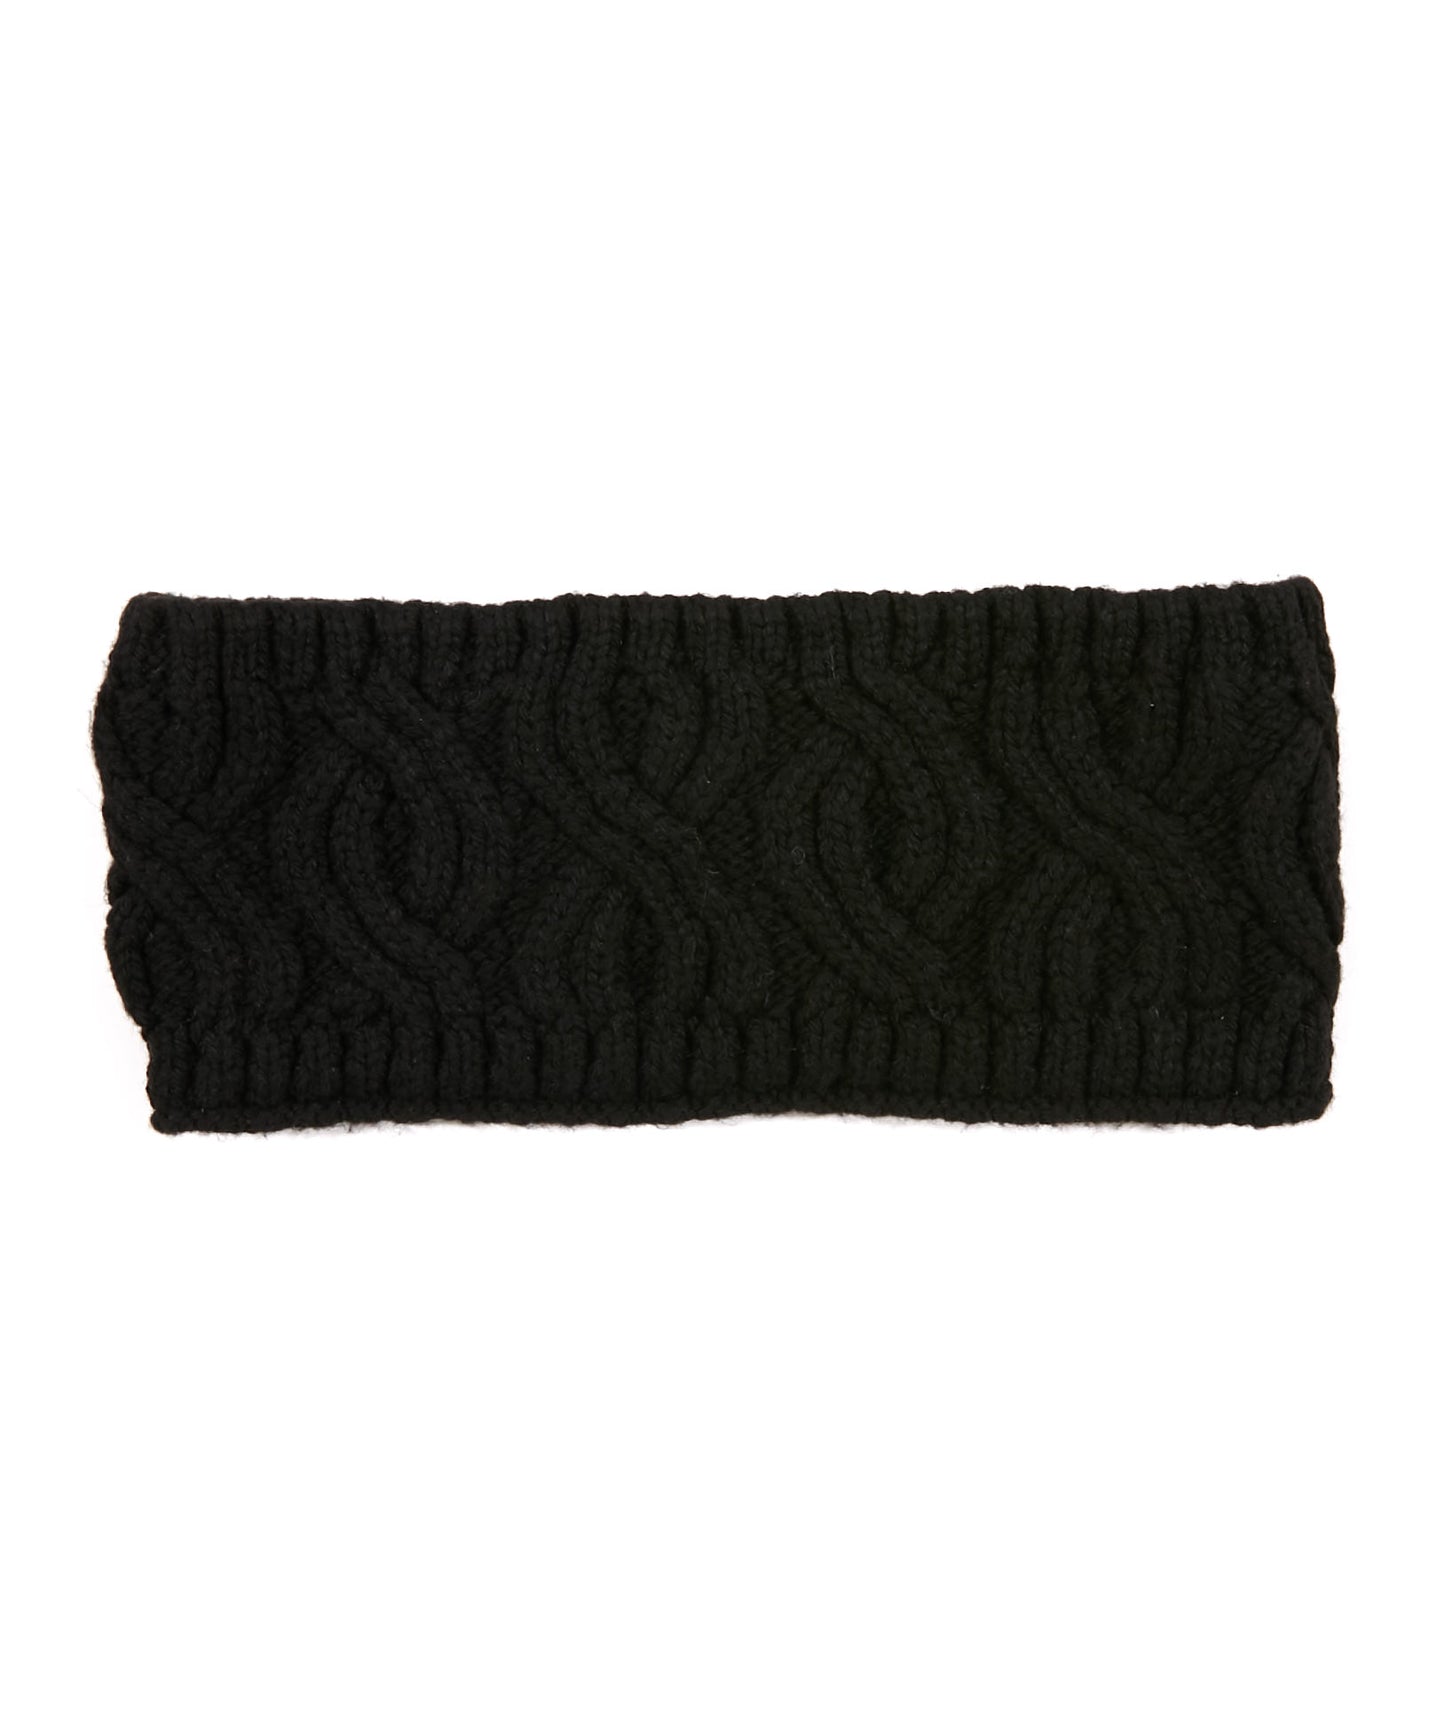 Recycled Headband in color Black